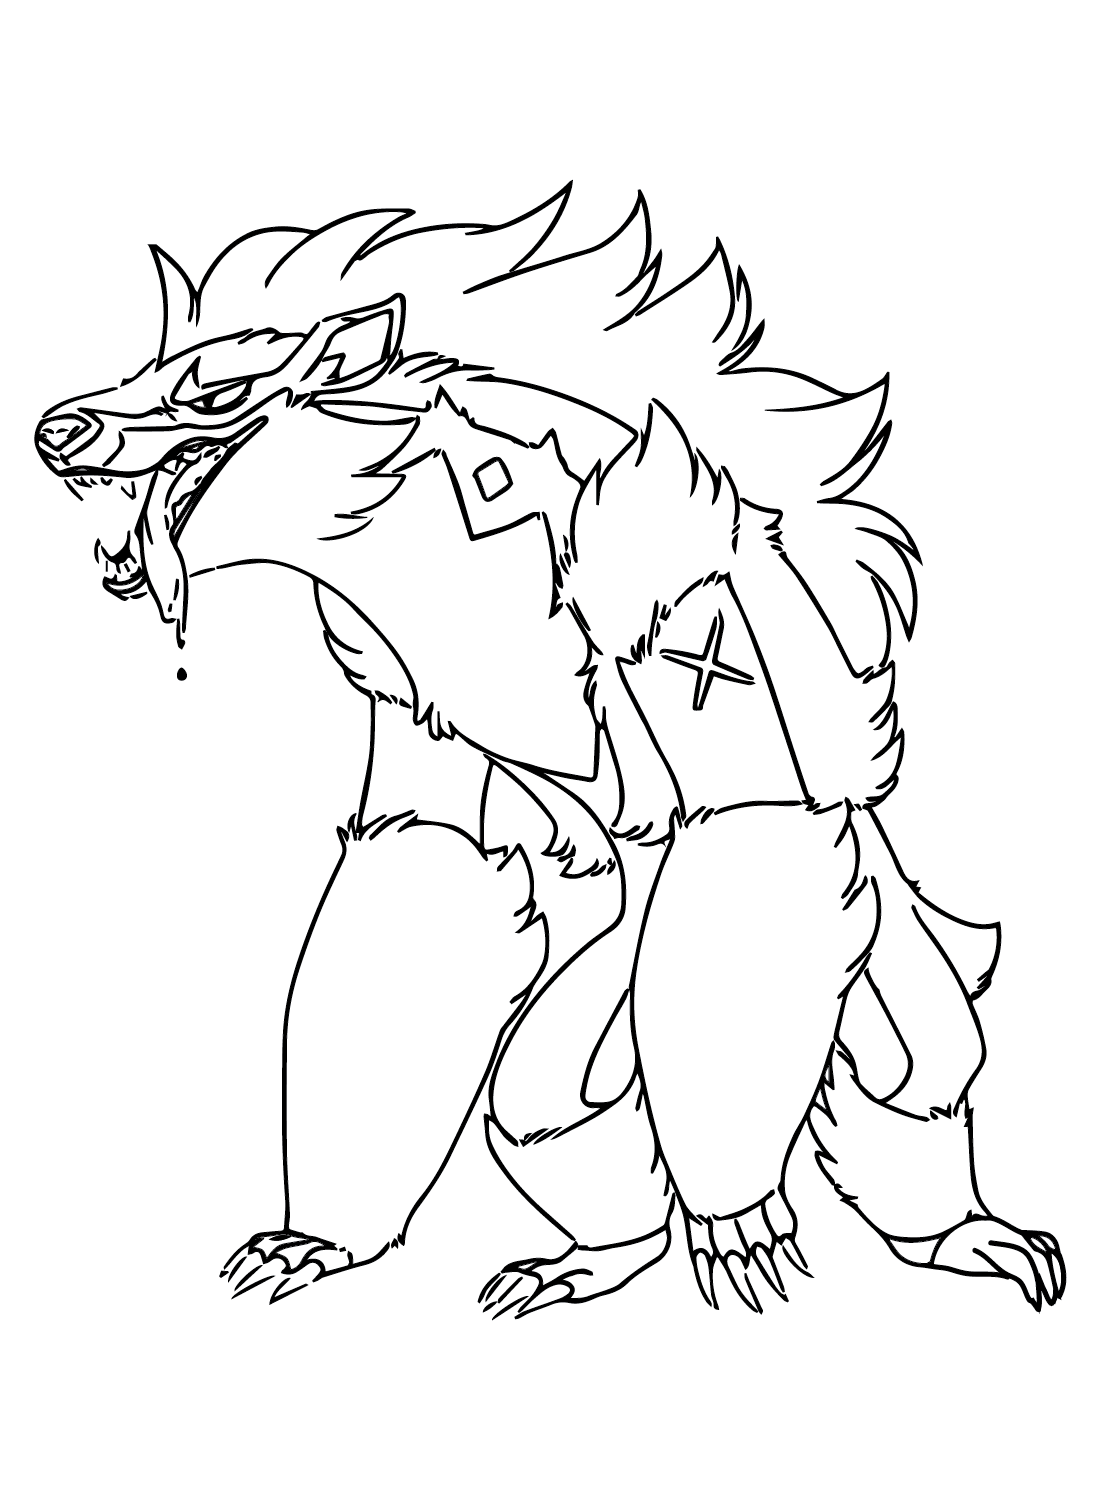 Obstagoon can Color from Obstagoon